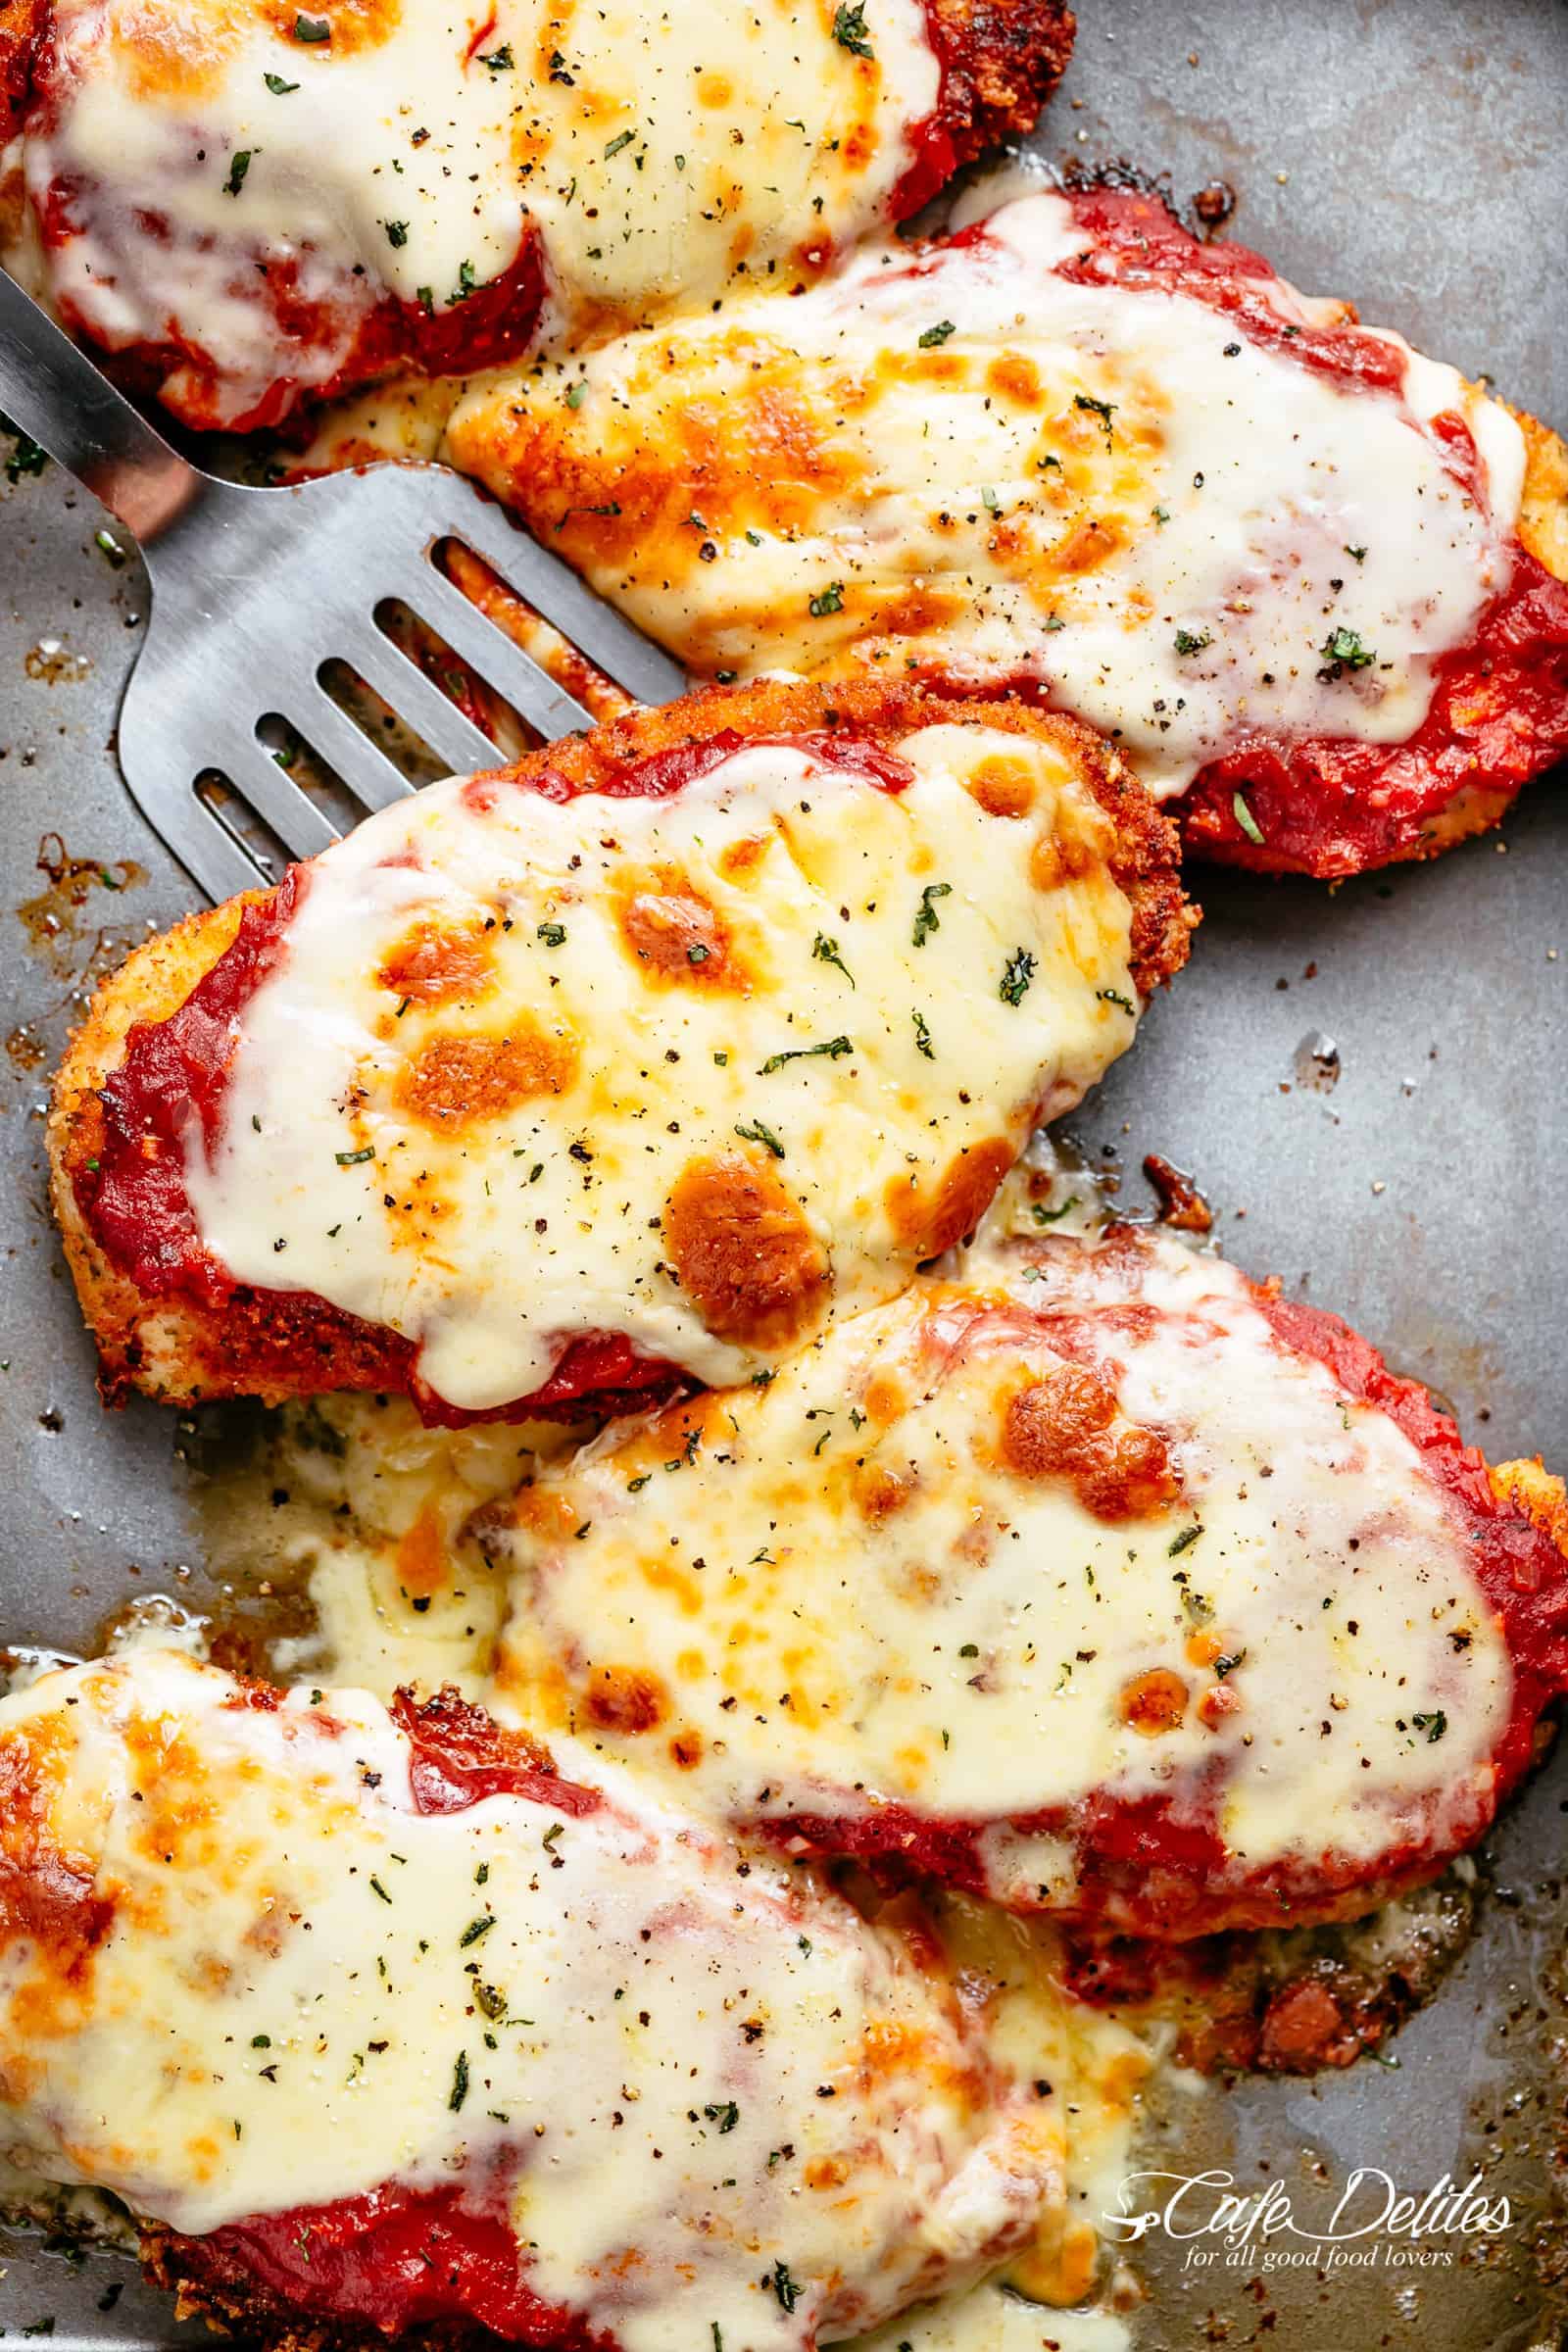 The Best Chicken Parmesan with a deliciously crispy breadcrumb coating, smothered in a rich homemade tomato sauce and melted mozzarella cheese! This is here best Chicken Parmesan you will ever make! Simple to make and worth every minute. If you love a crispy crumb coating vs soggy crumb, look no further! | cafedelites.com